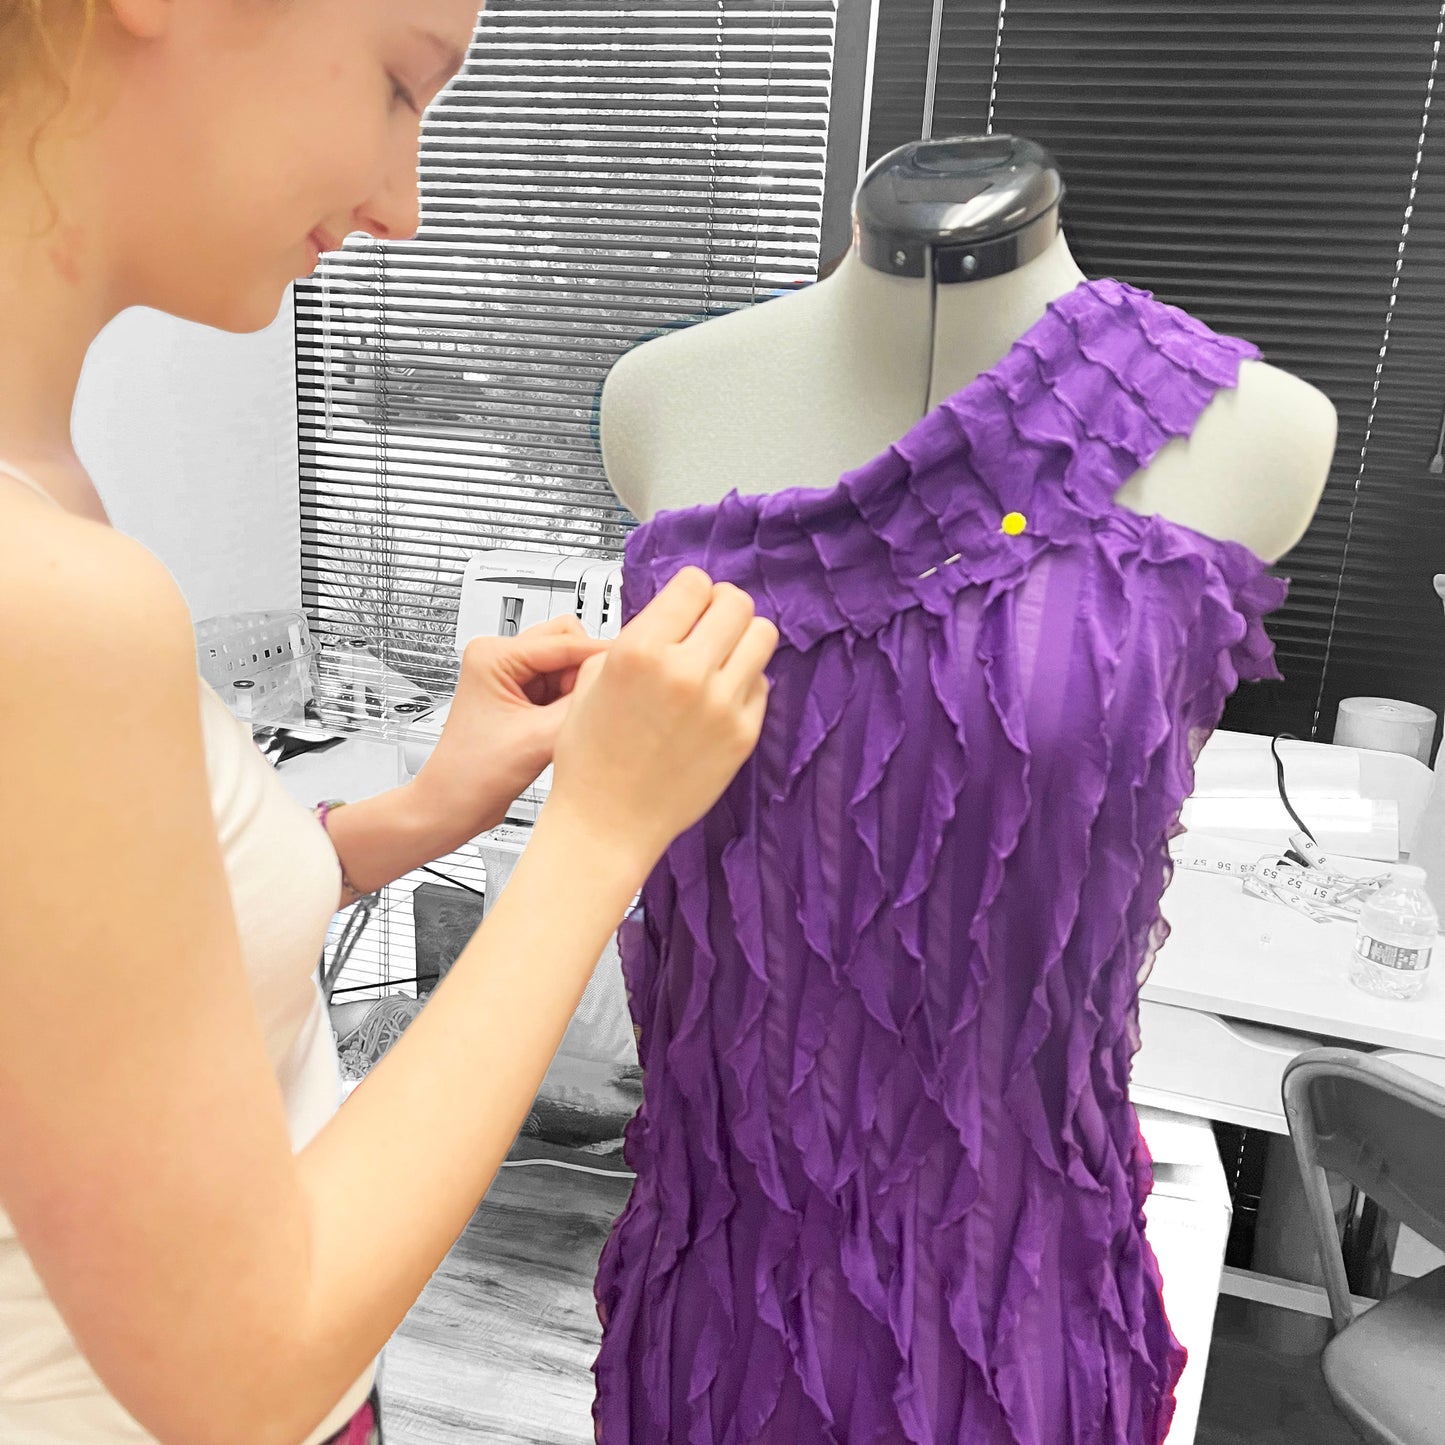 Advanced Sewing and Clothing Design Class for Juniors